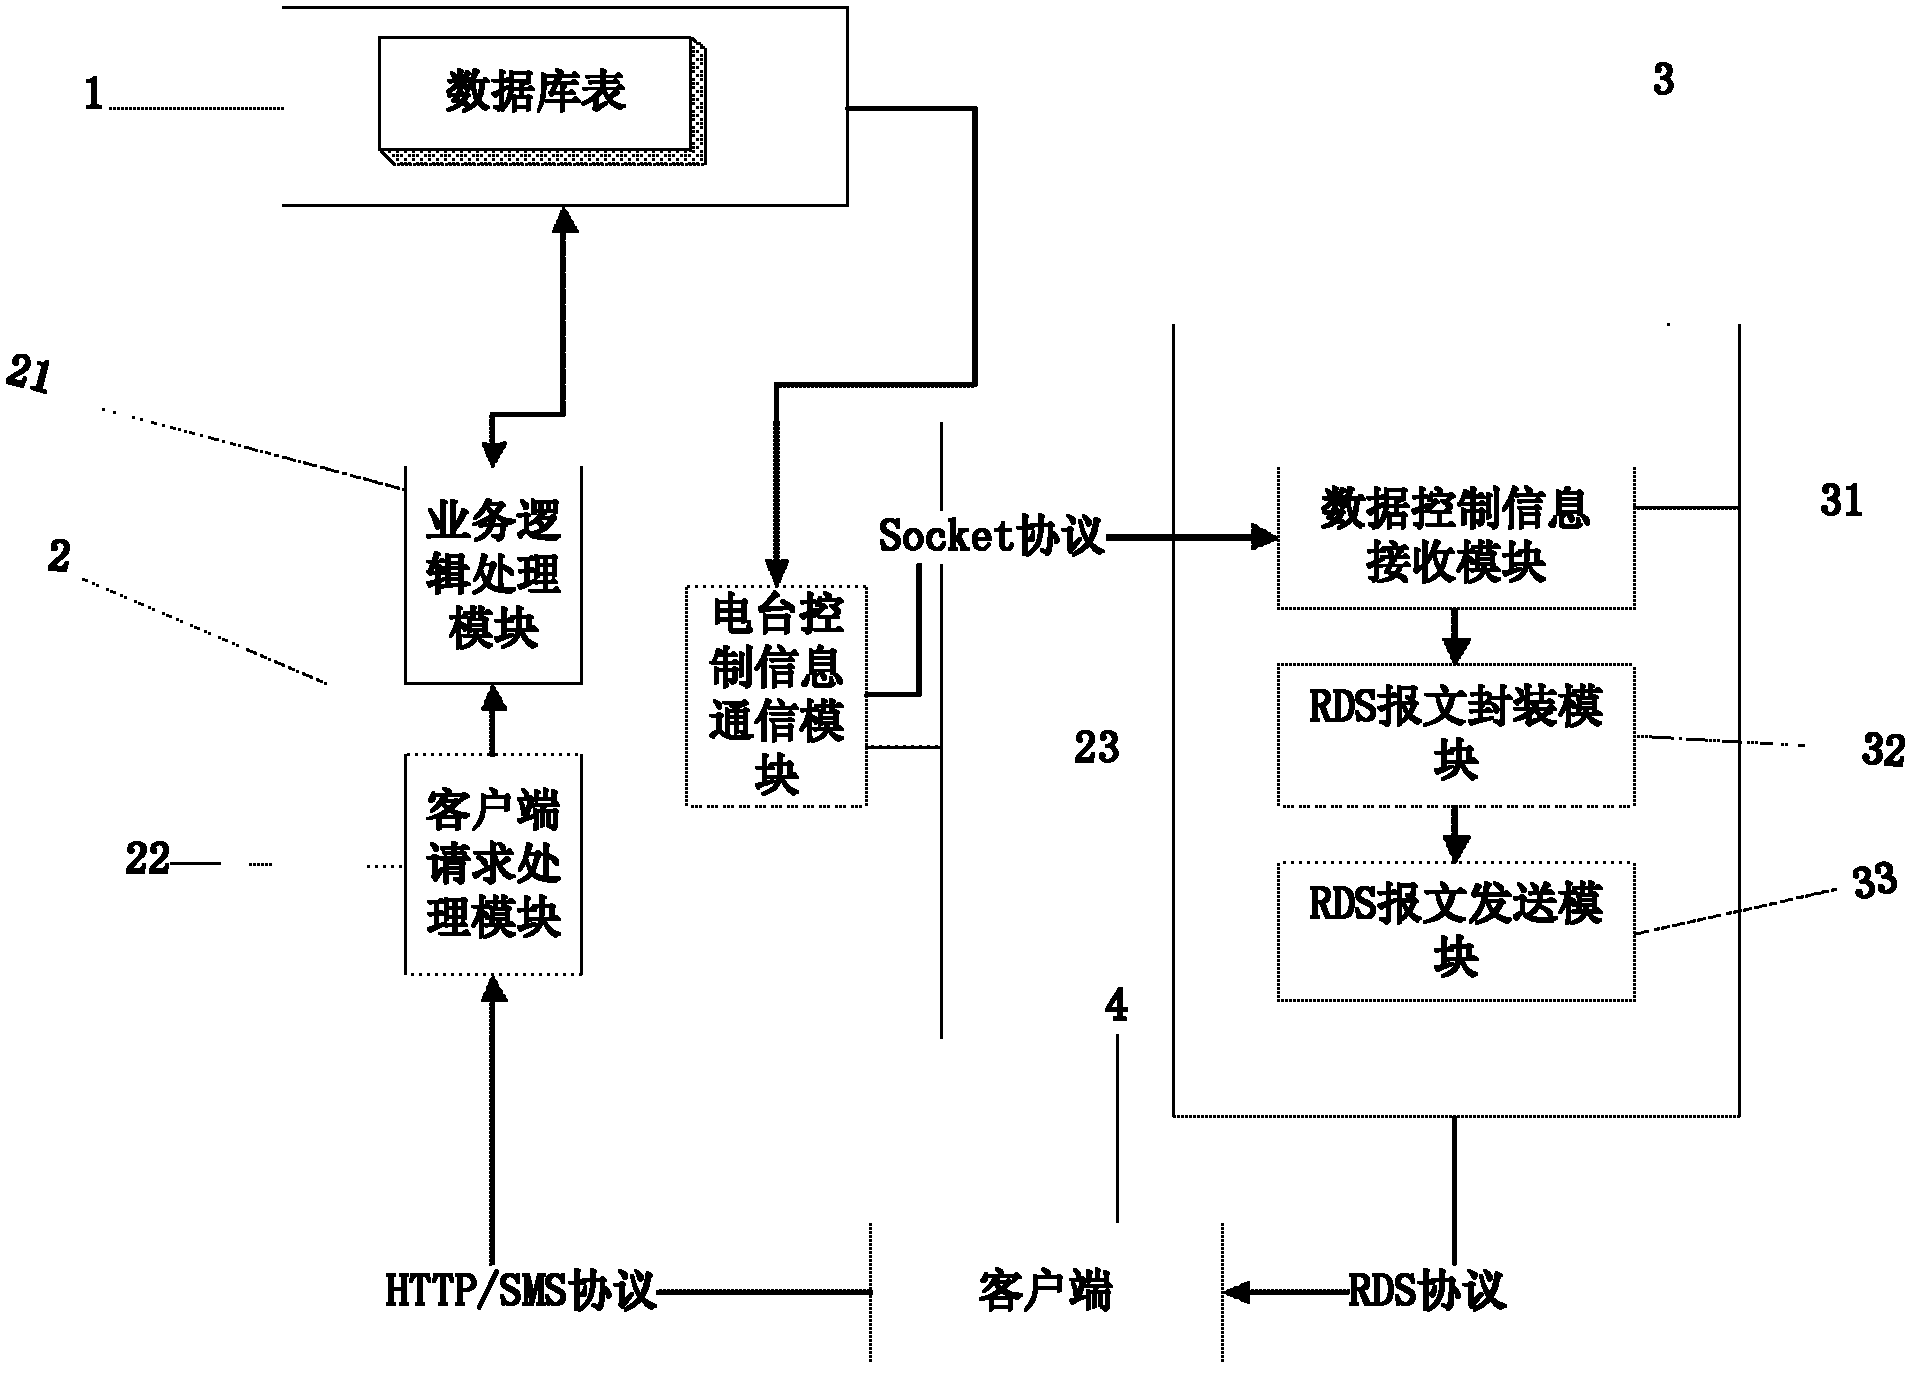 Online group interaction system and method based on RDS (Remote Data Services)